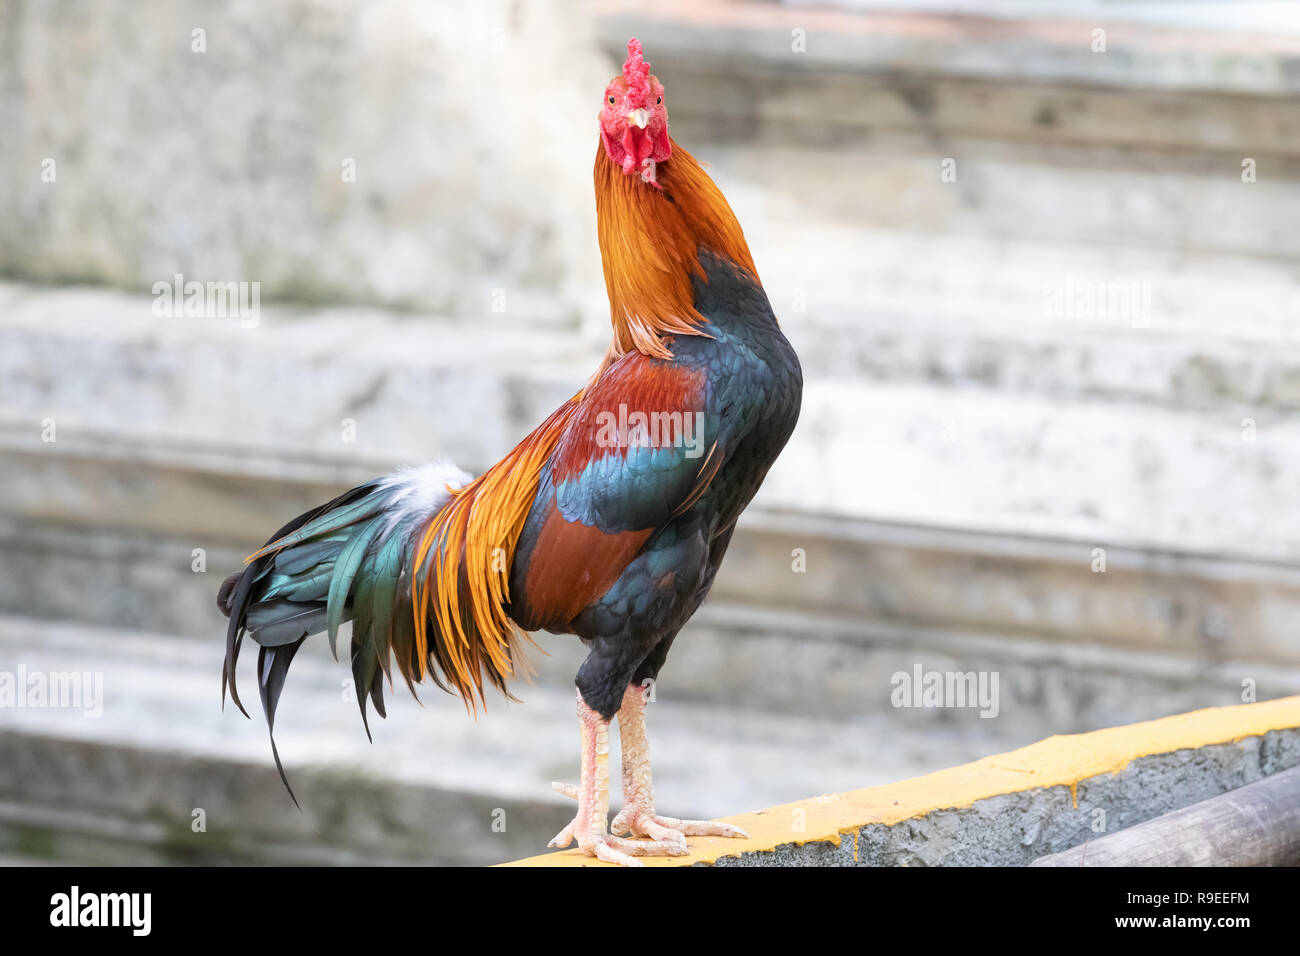 Thai rooster looking at me. Stock Photo